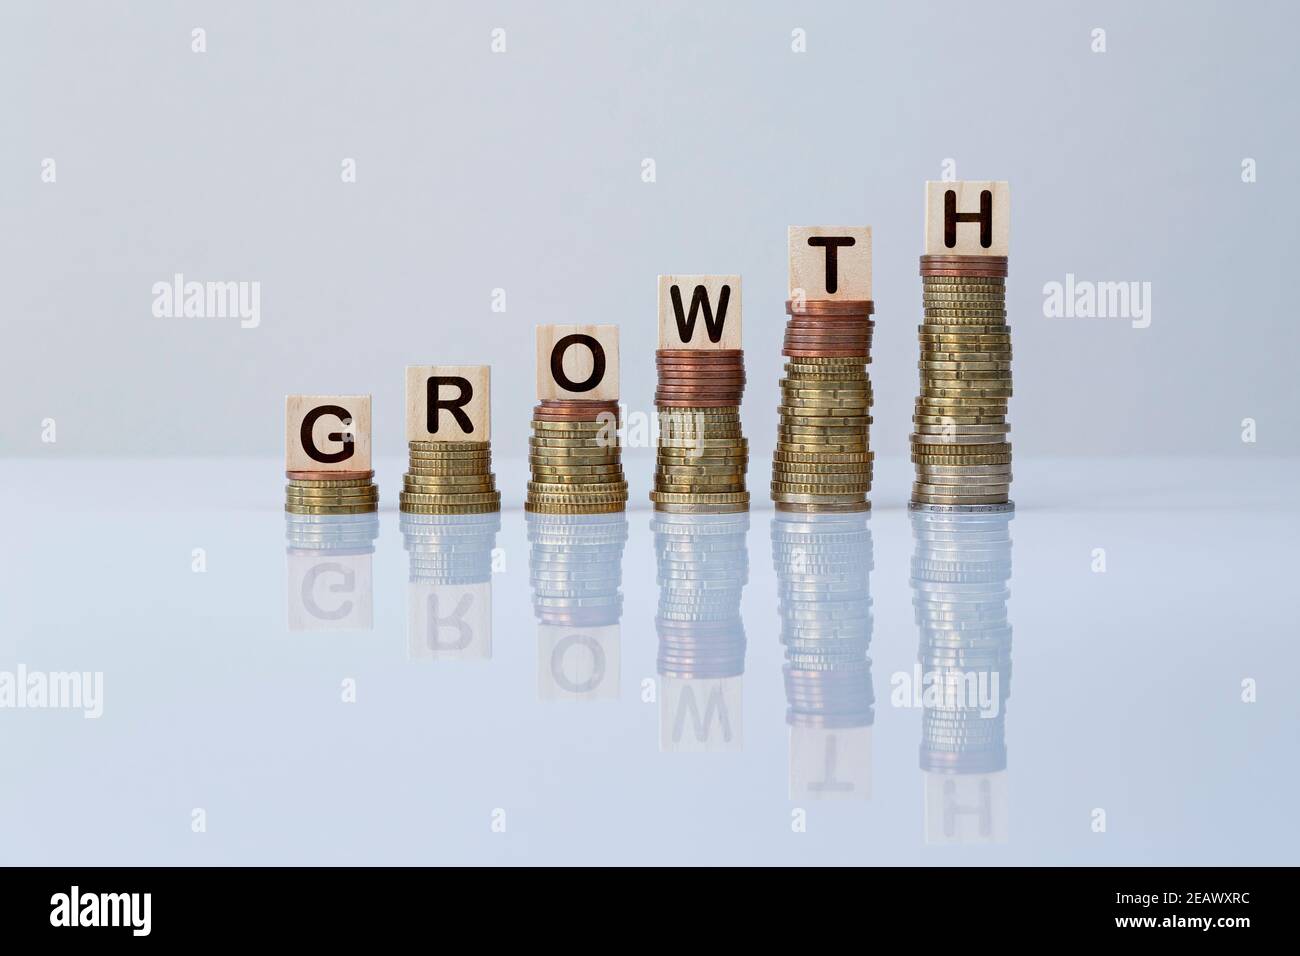 Word 'GROWTH' on wooden blocks on top of ascending stacks of coins on gray background. Concept photo of economy, business, finance, financial growth. Stock Photo